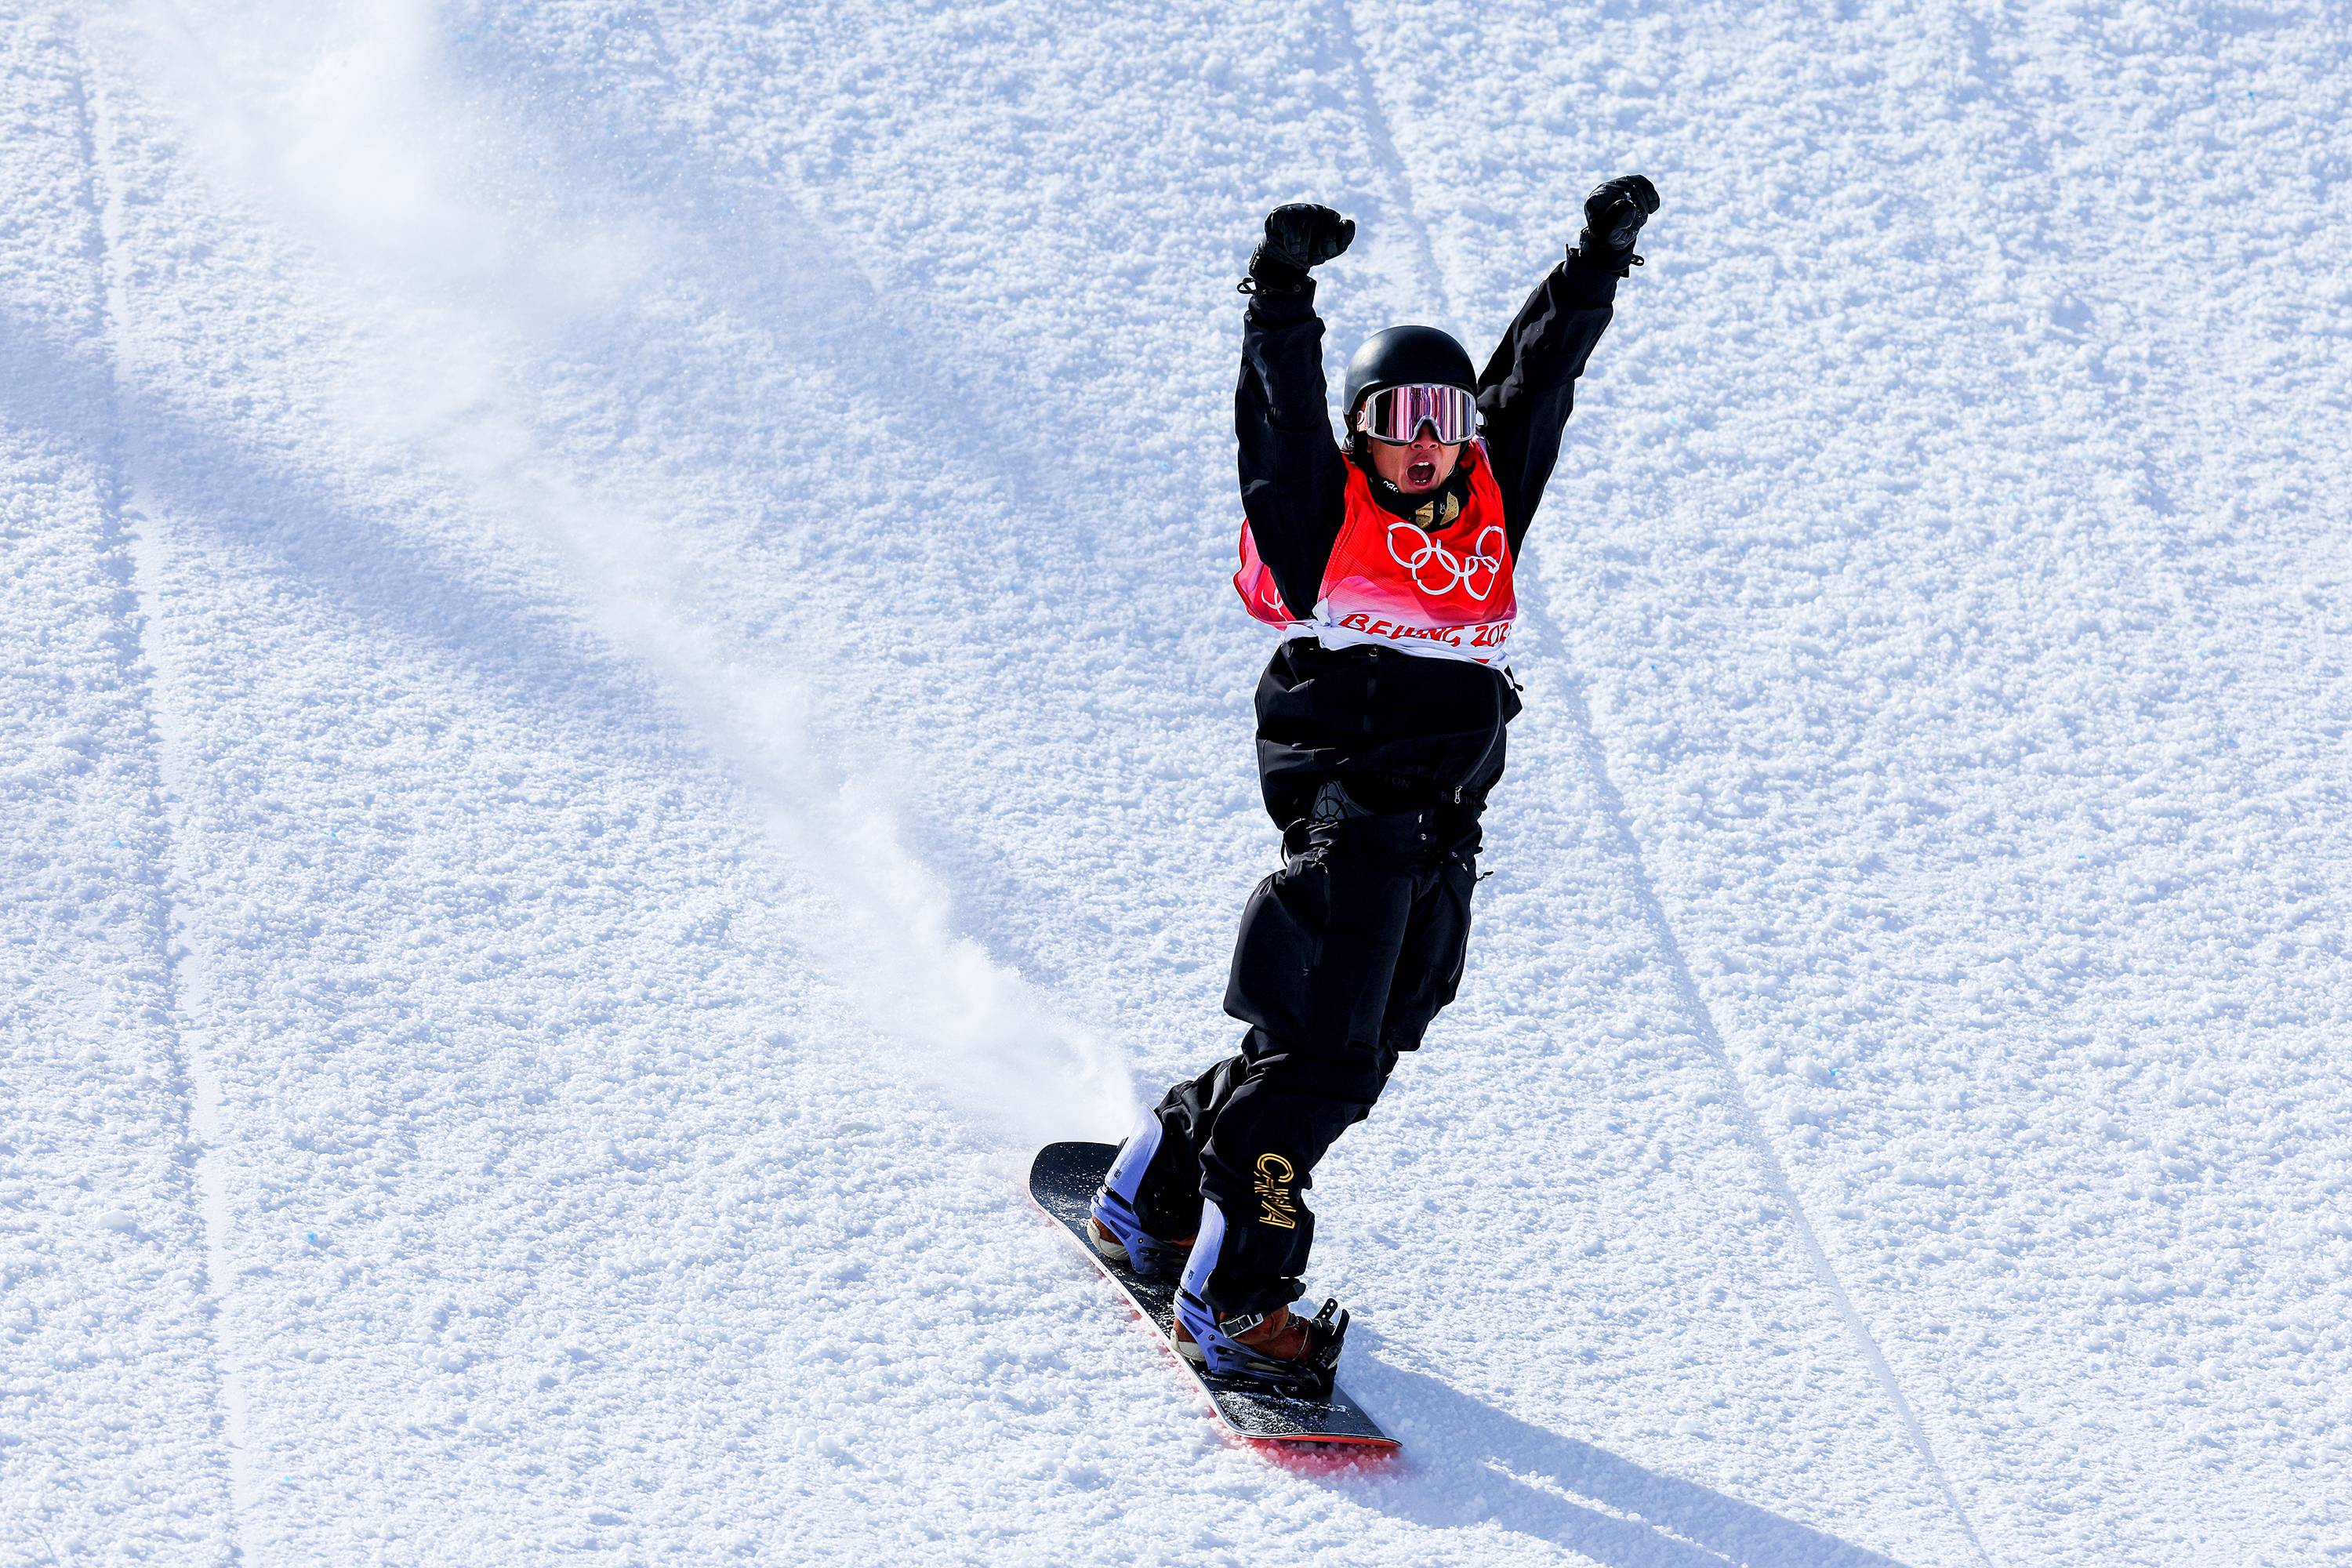 China's Su Yiming celebrates during the men's snowboard slopestyle final on Feb. 7.